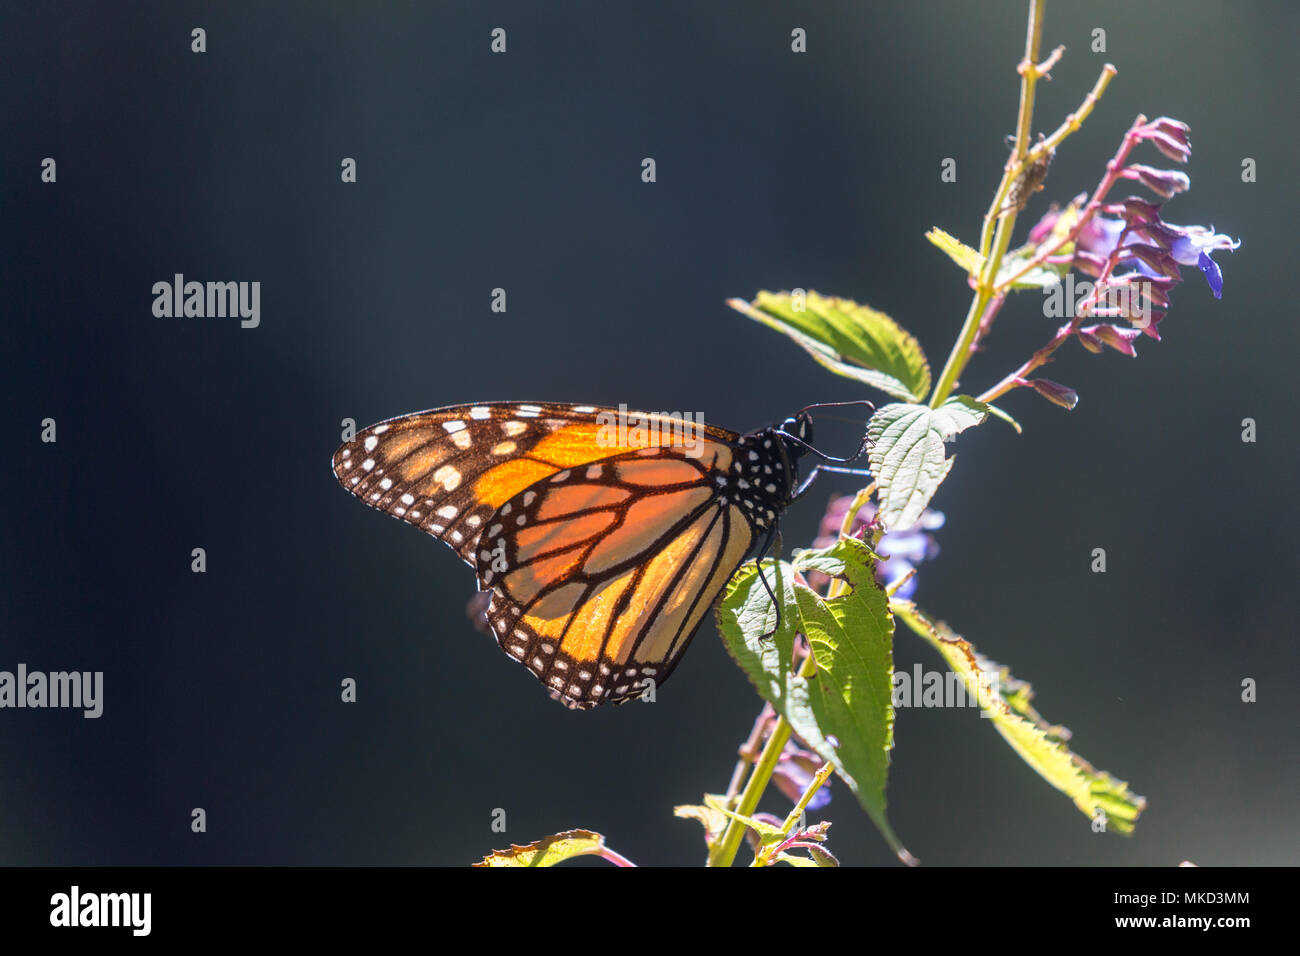 Monarch butterfly (Danaus plexippus), in wintering from November to March in oyamel pine (Abies religiosa) forest, butterflies gathering nectar, El Rosario, Reserve of the Biosfera Monarca, Angangueo, State of Michoacan, Mexico Stock Photo